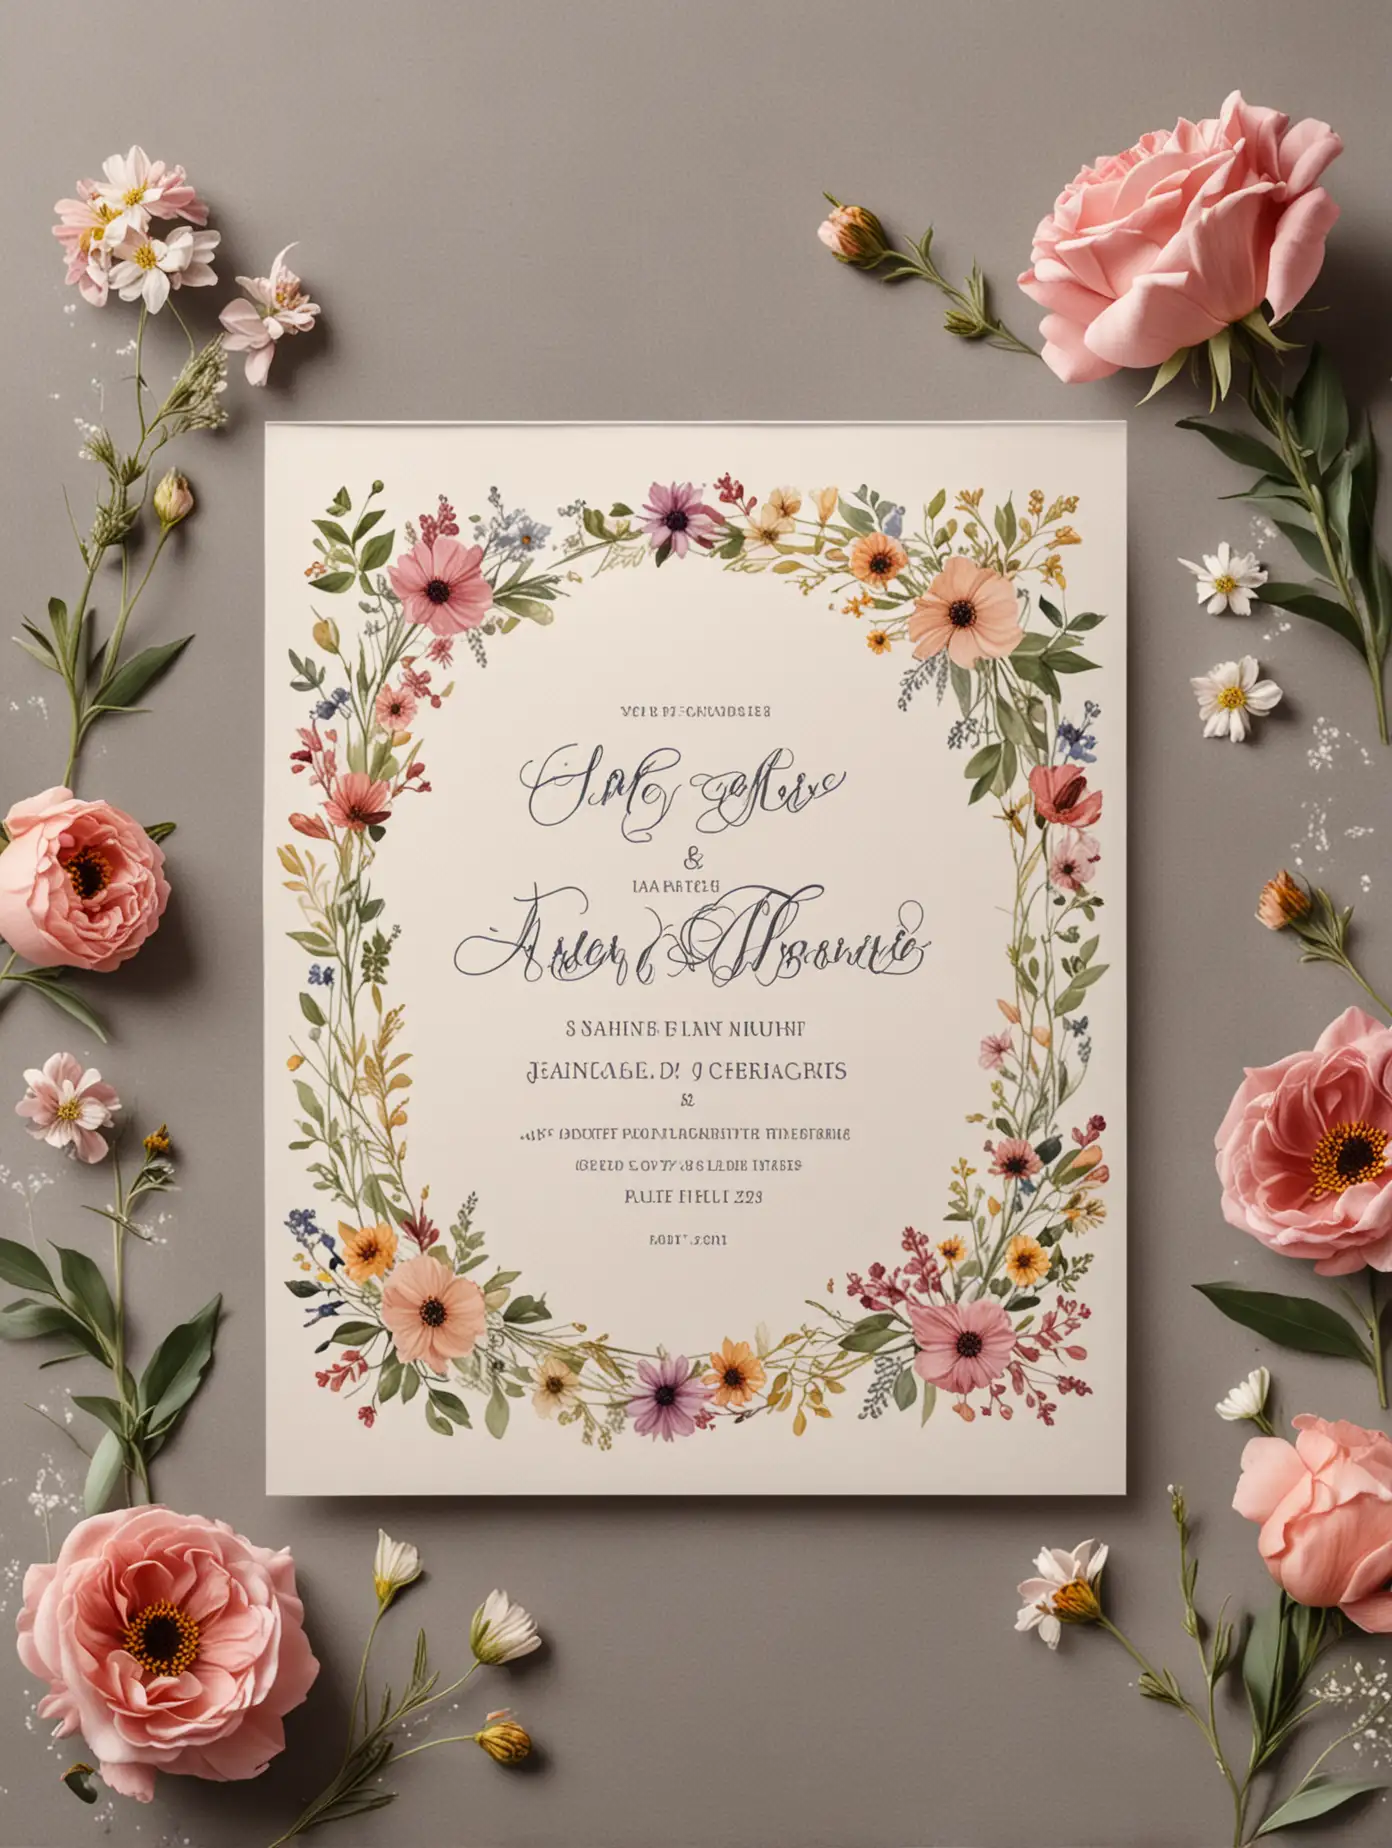 an invitation mockup for a wedding invitation with real flowers around the invite but not covering it